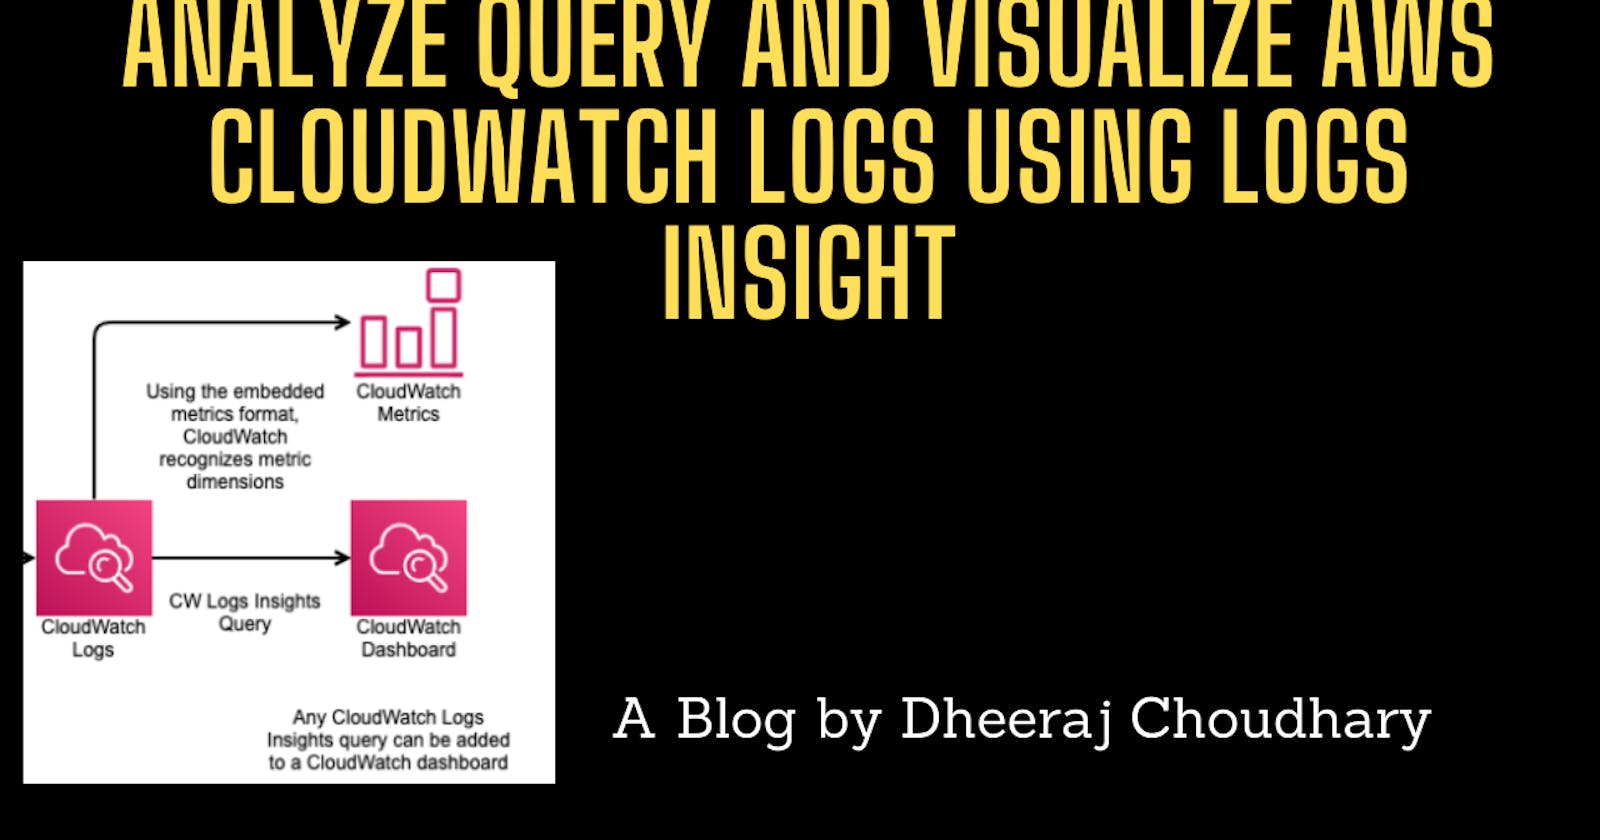 Analyze Query And Visualize AWS Cloudwatch Logs Using Logs Insight